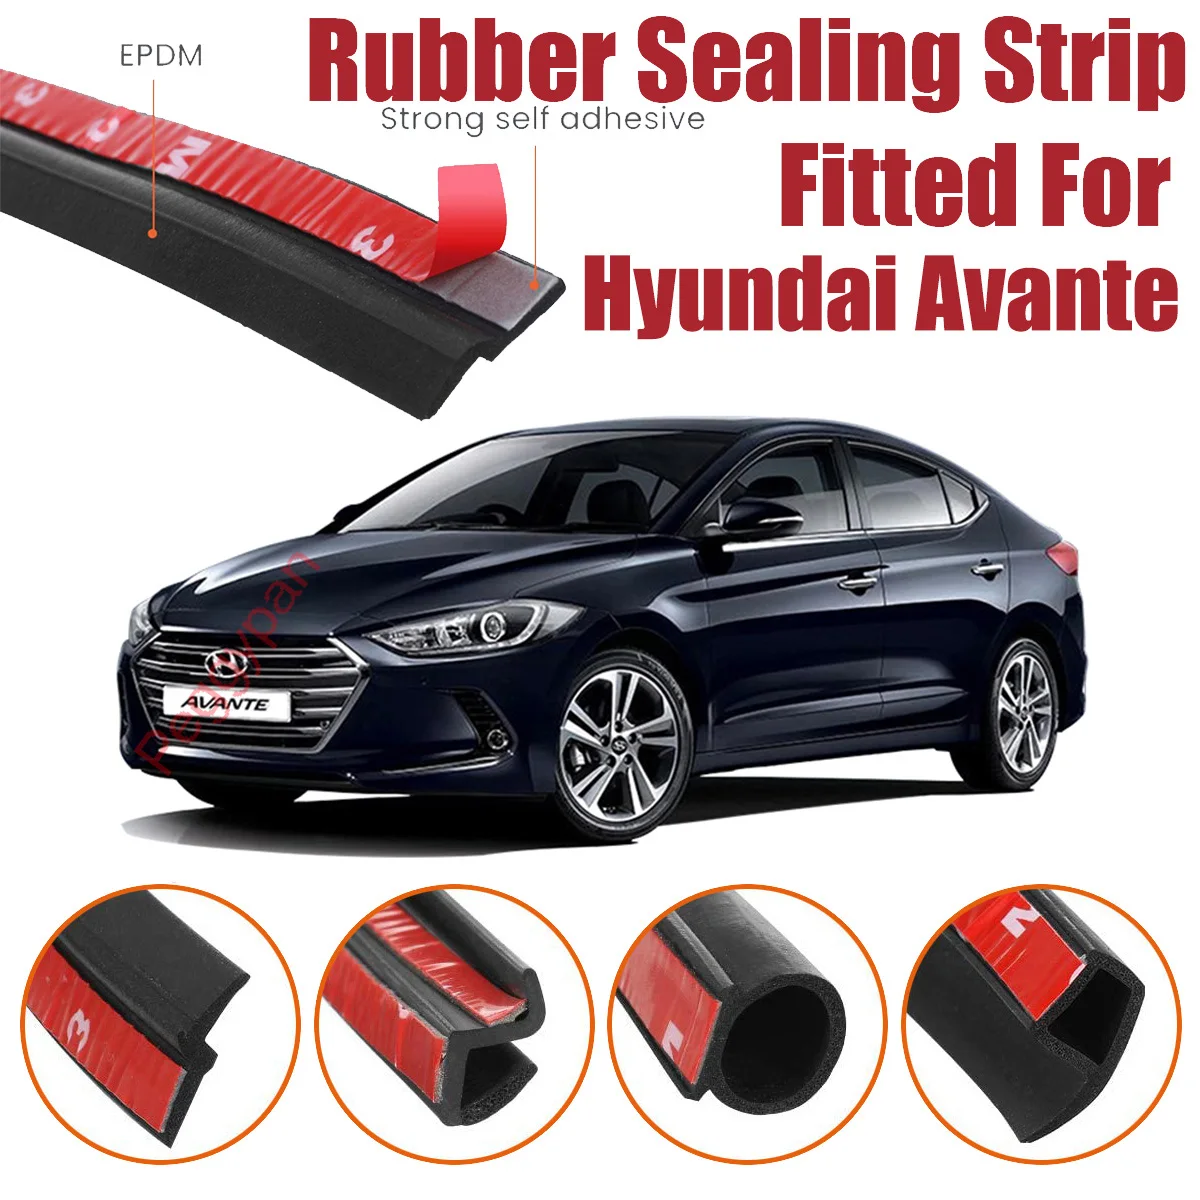 Door Seal Strip Kit Self Adhesive Window Engine Cover Soundproof Rubber Weather Draft Wind Noise Reduction For Hyundai Avante